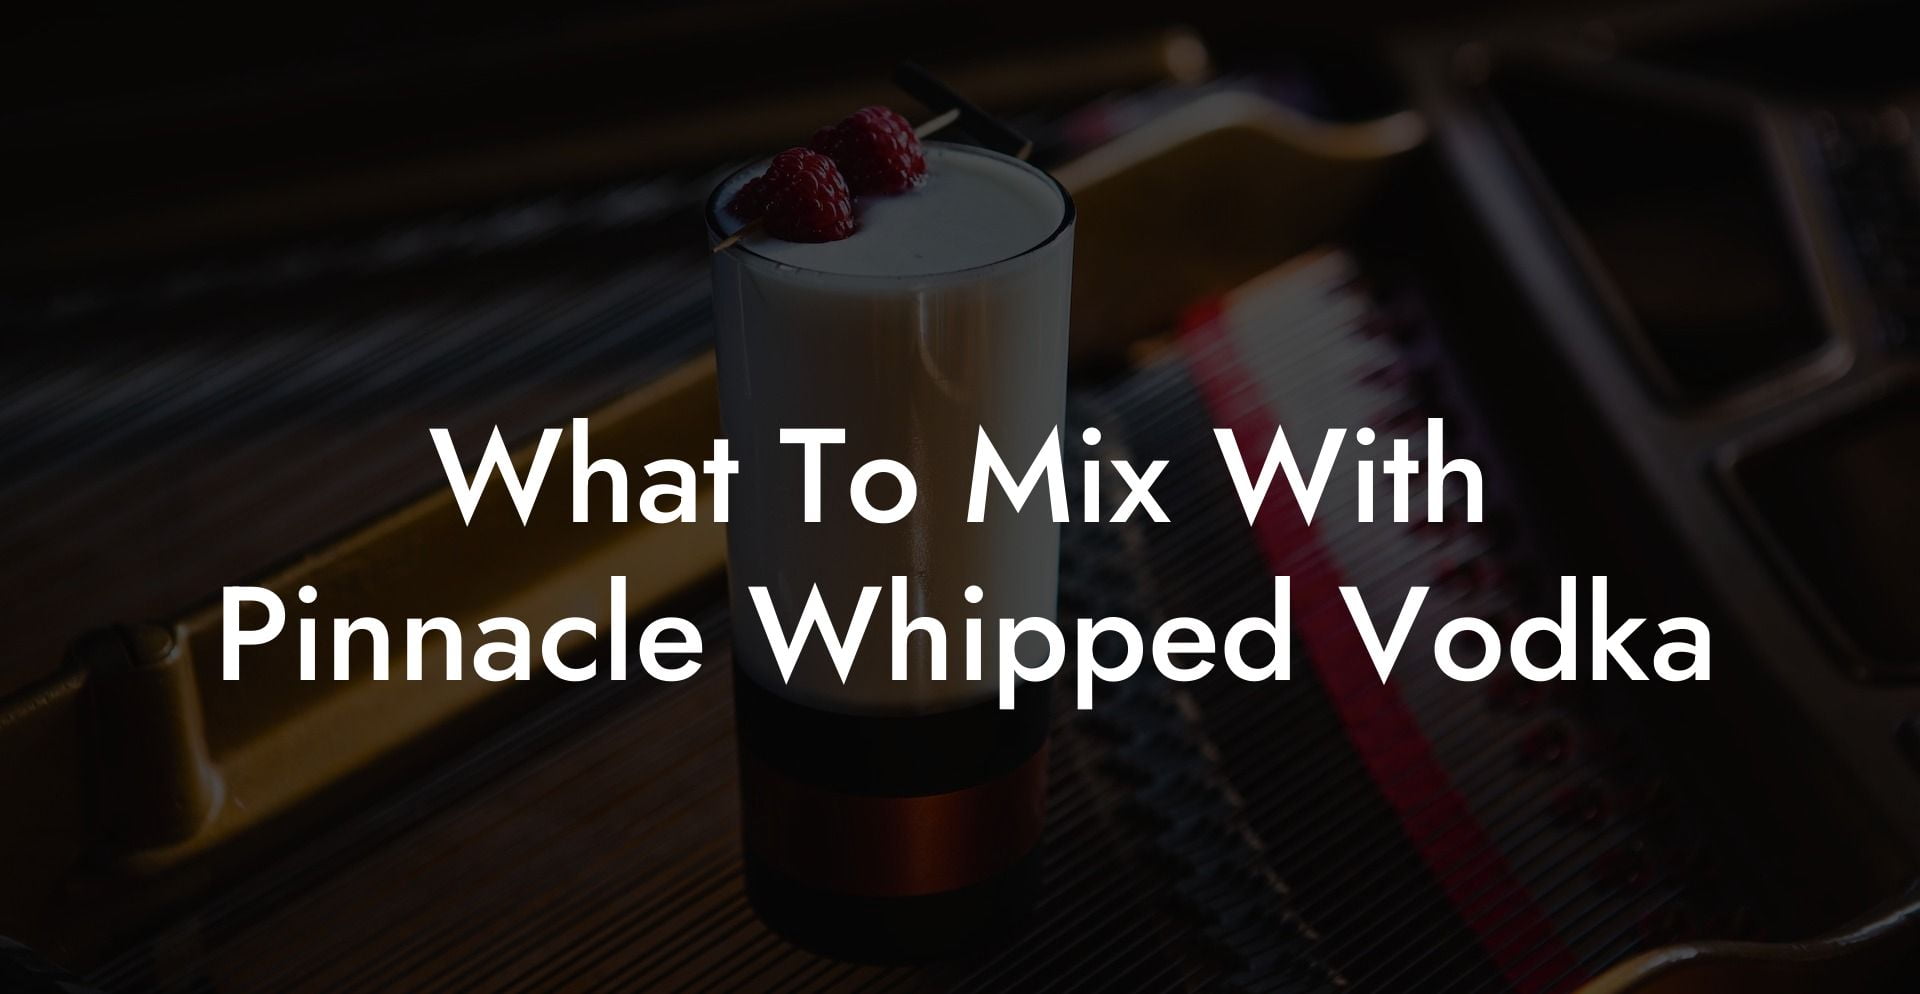 What To Mix With Pinnacle Whipped Vodka